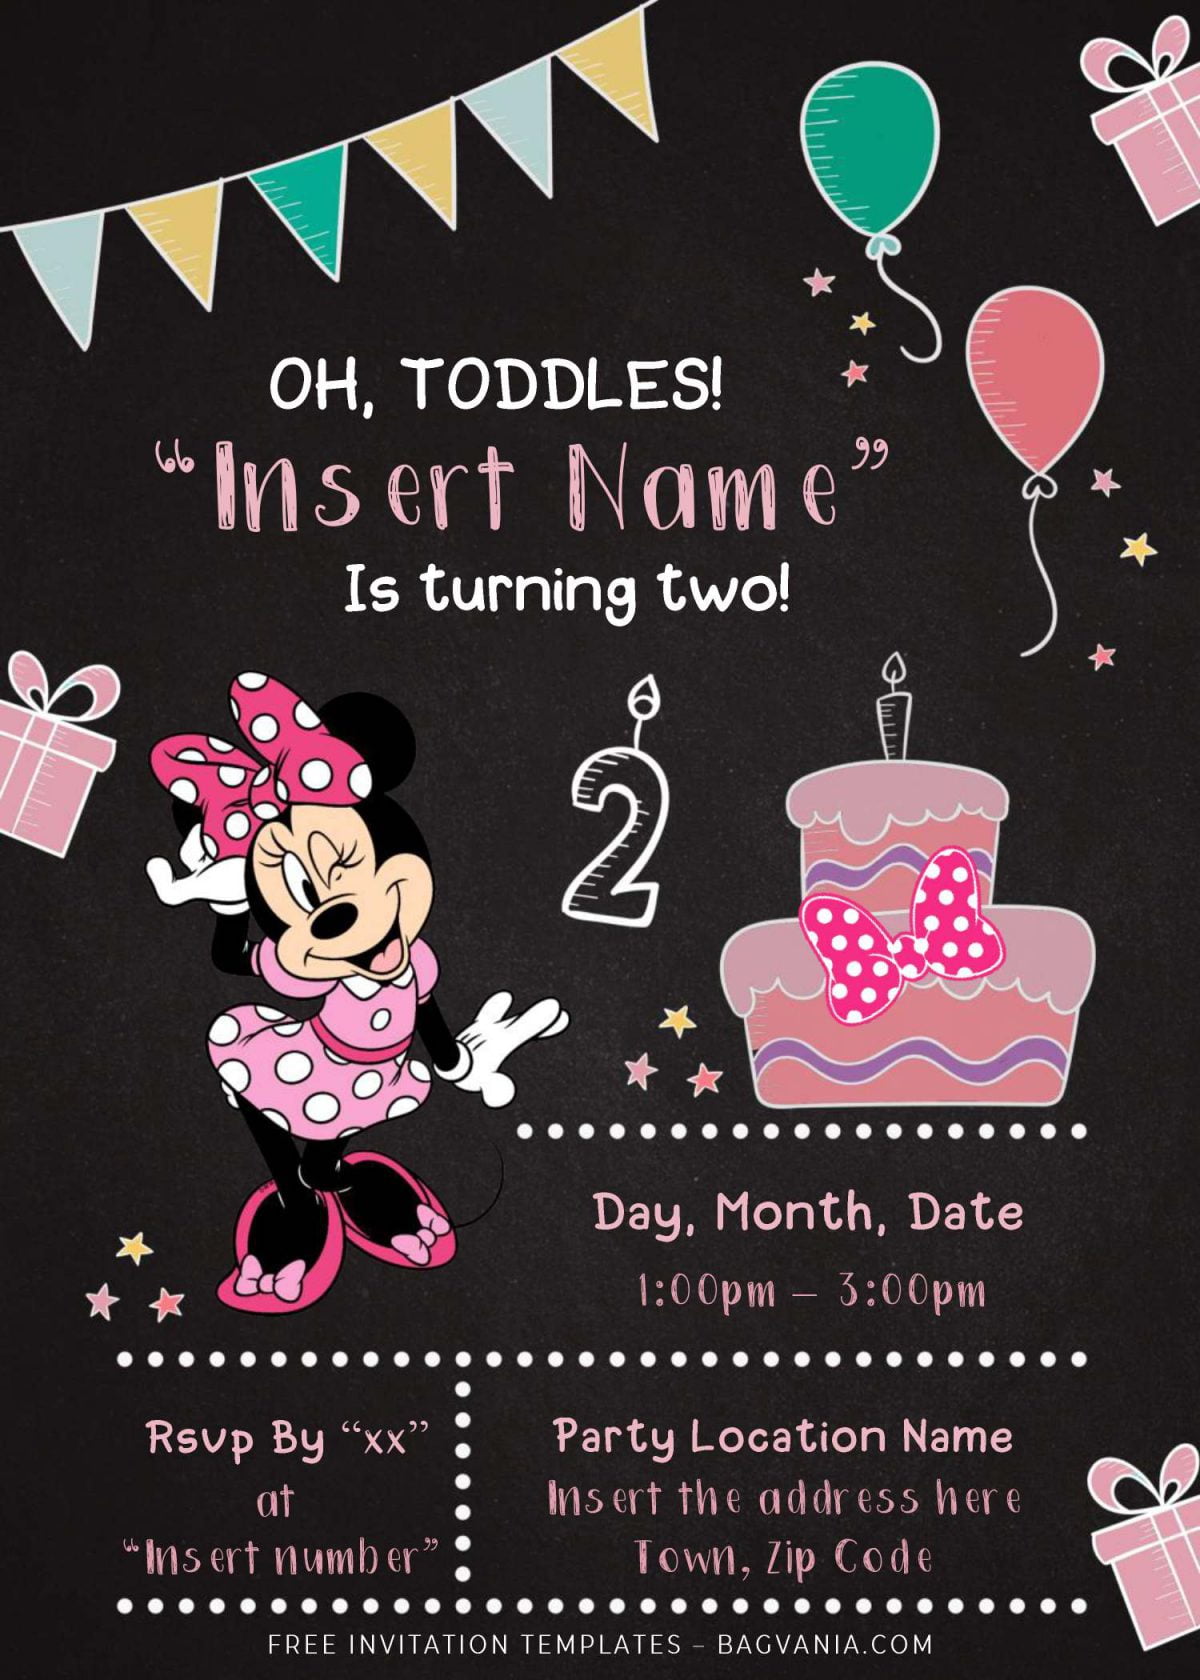 Free Minnie Mouse Chalkboard Birthday Invitation Templates For Word and has cute chalkboard drawings